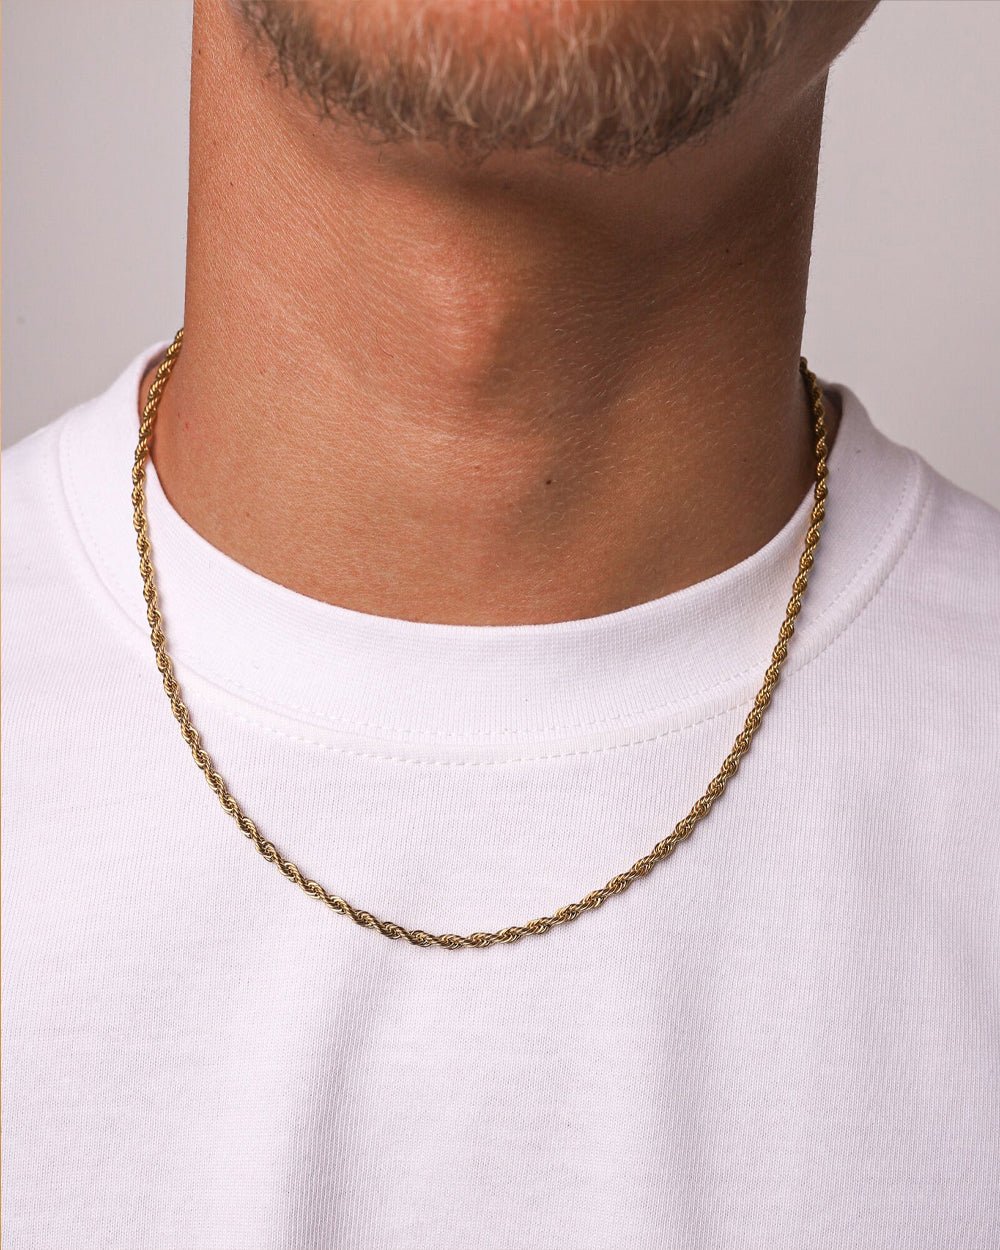 CLEAN ROPE CHAIN. - 3MM 18K GOLD